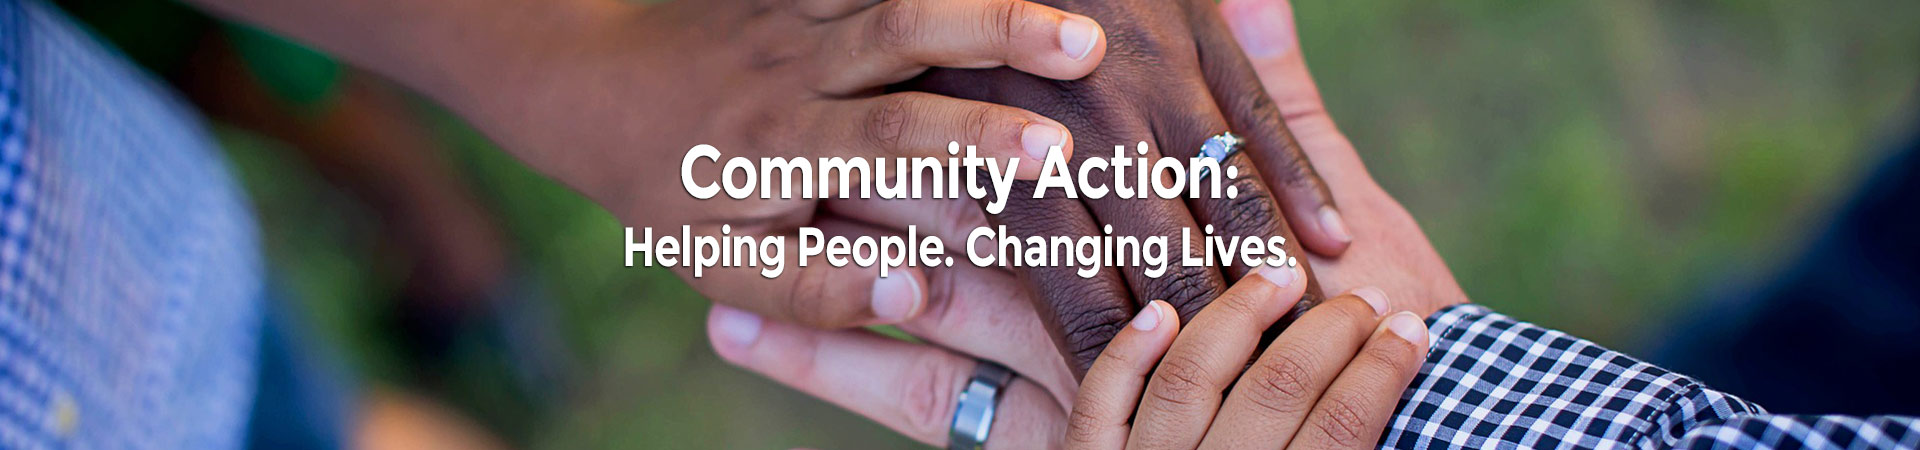 Community Action: Helping People. Changing Lives.